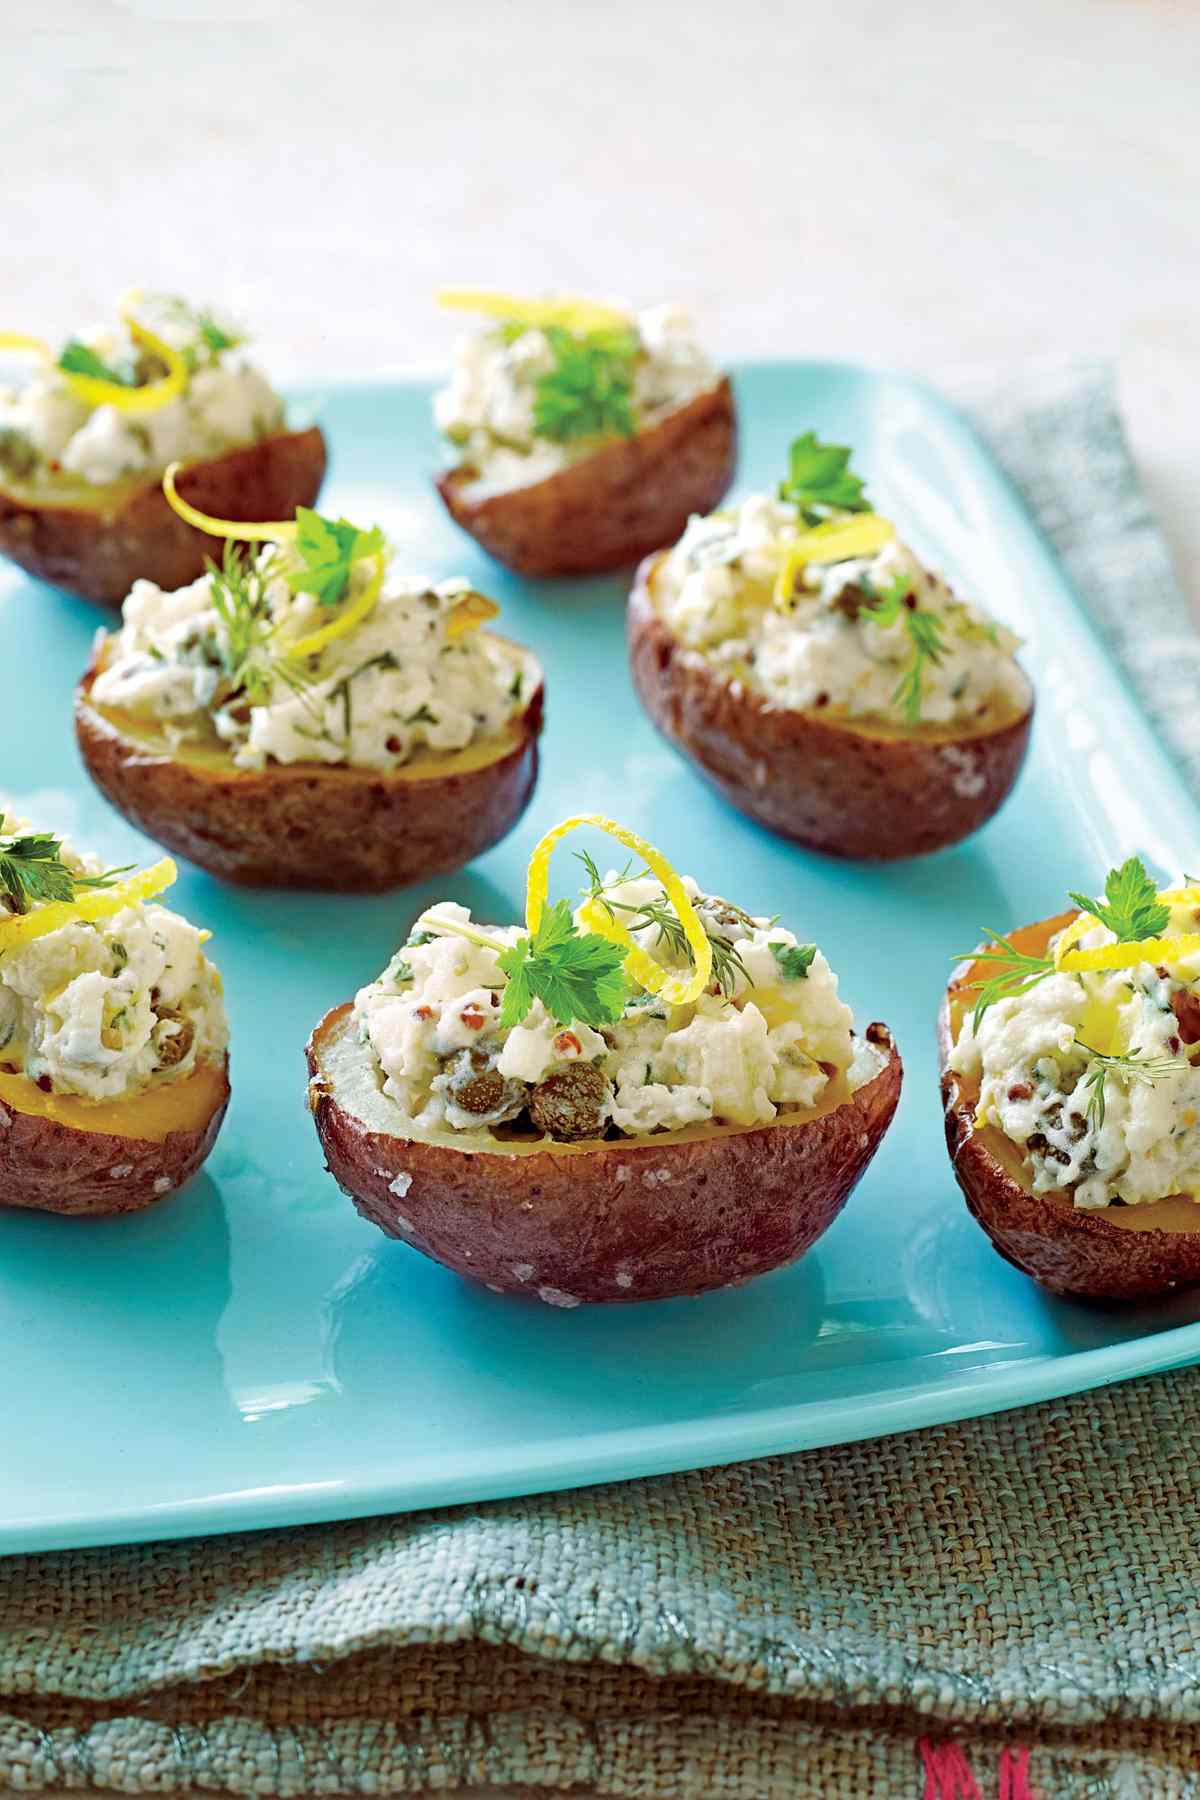 100 Best Party Appetizers And Recipes Southern Living,Shelves For Clothes In Bedroom